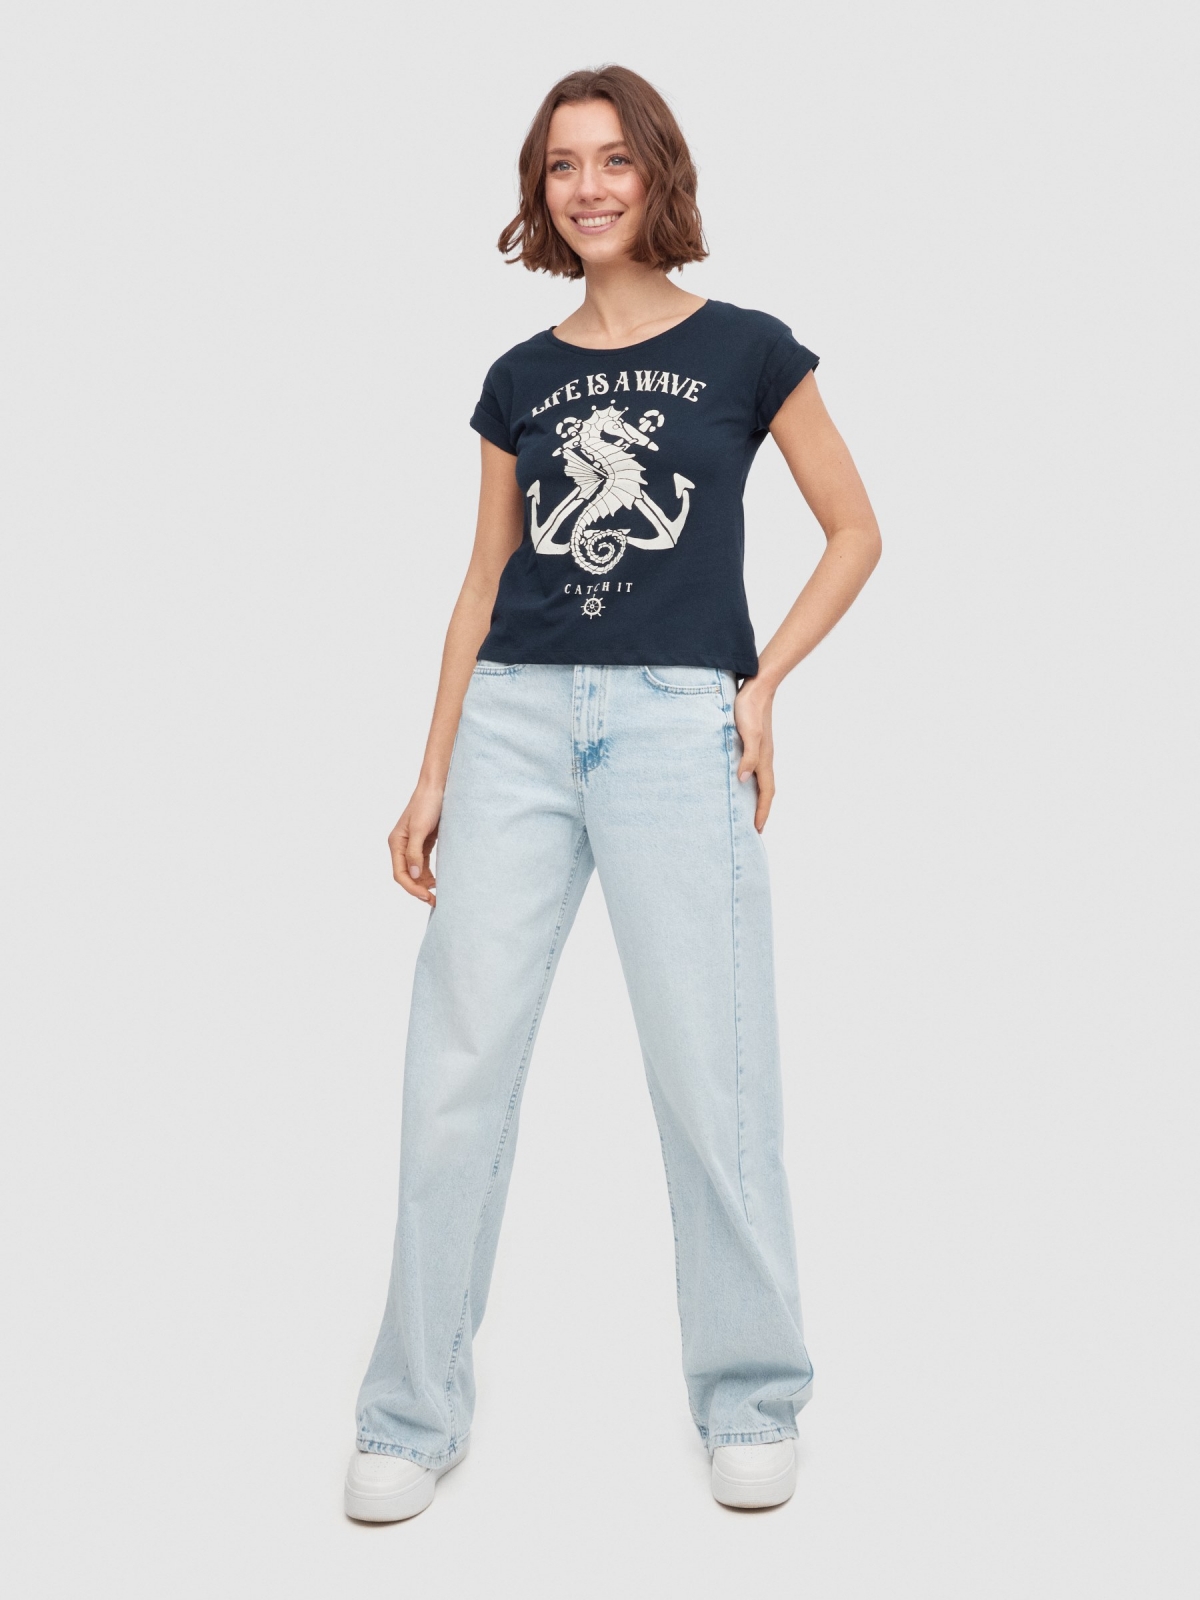 Seahorse T-shirt navy front view